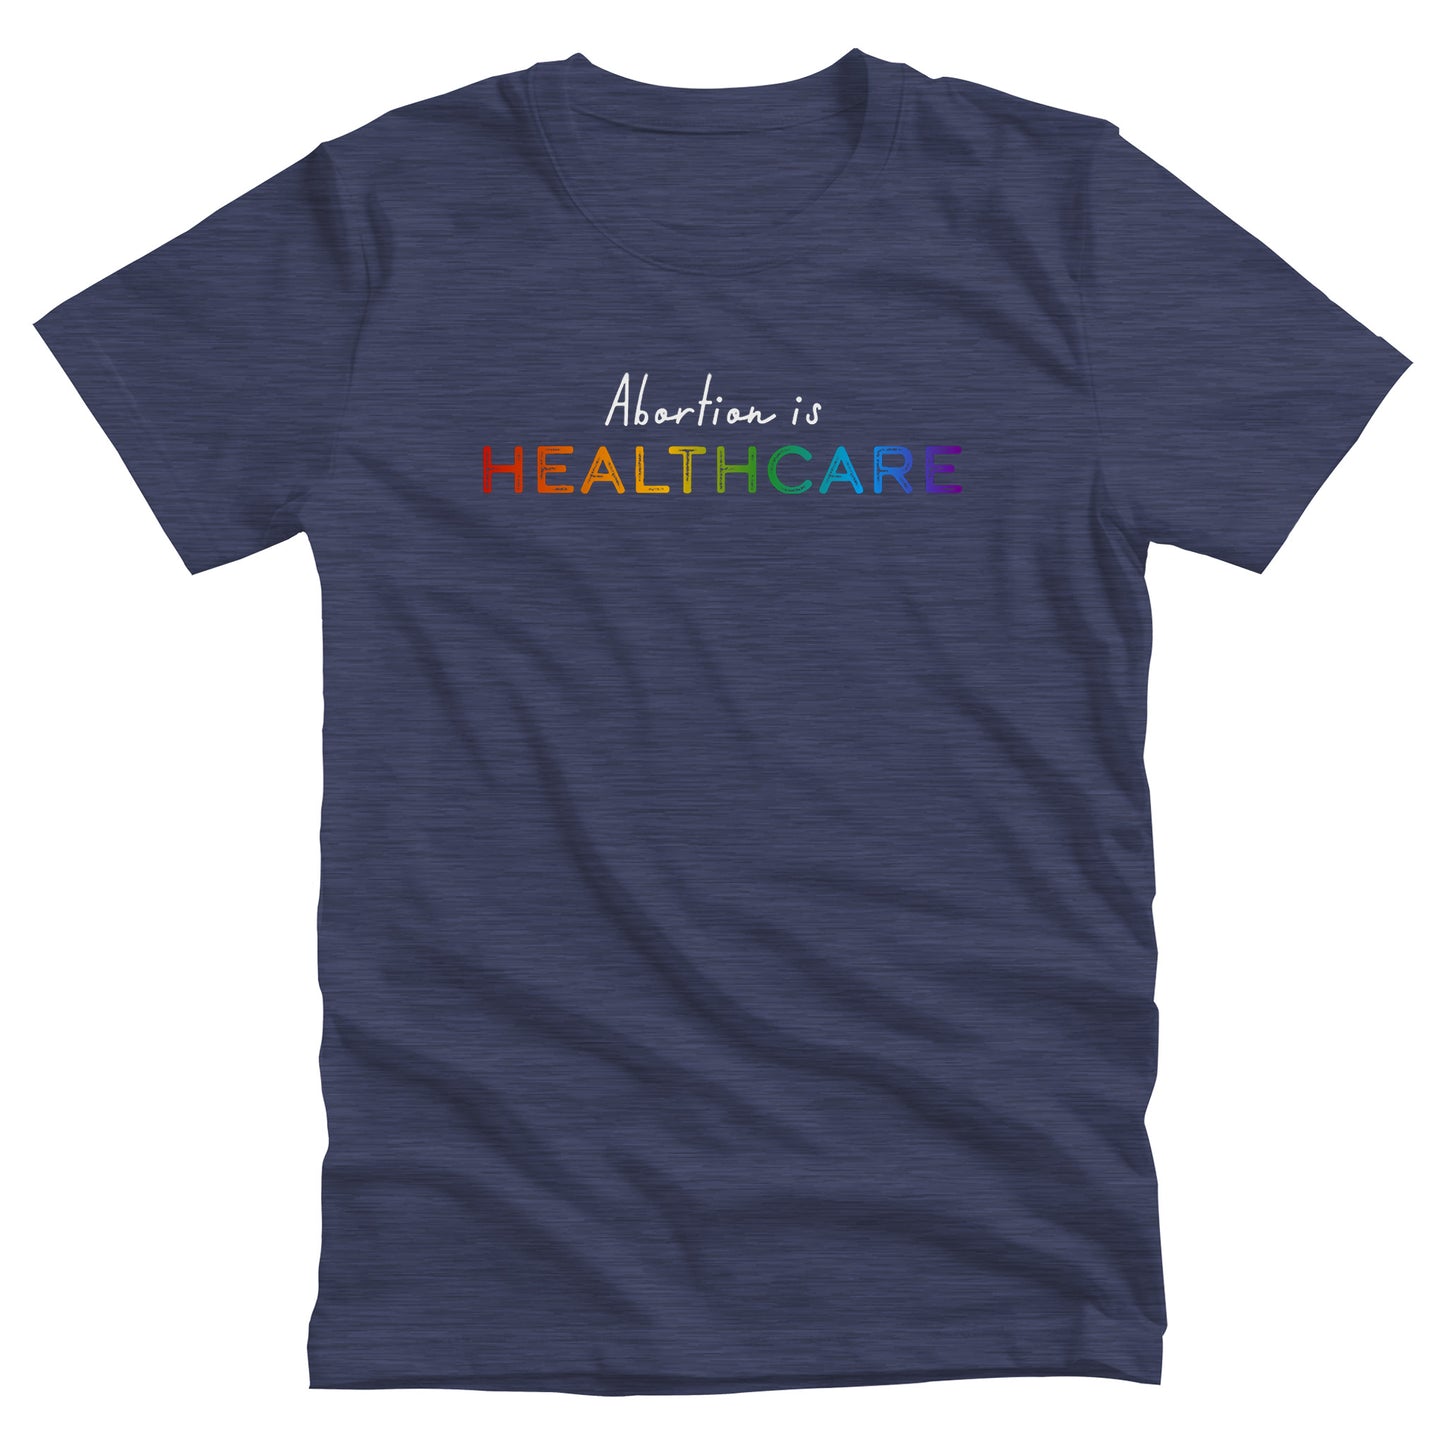 Heather Navy color unisex t-shirt that says, “Abortion is Healthcare.” The words “Abortion is” is in a script font, and “Healthcare” is in all caps in a rainbow gradient color.